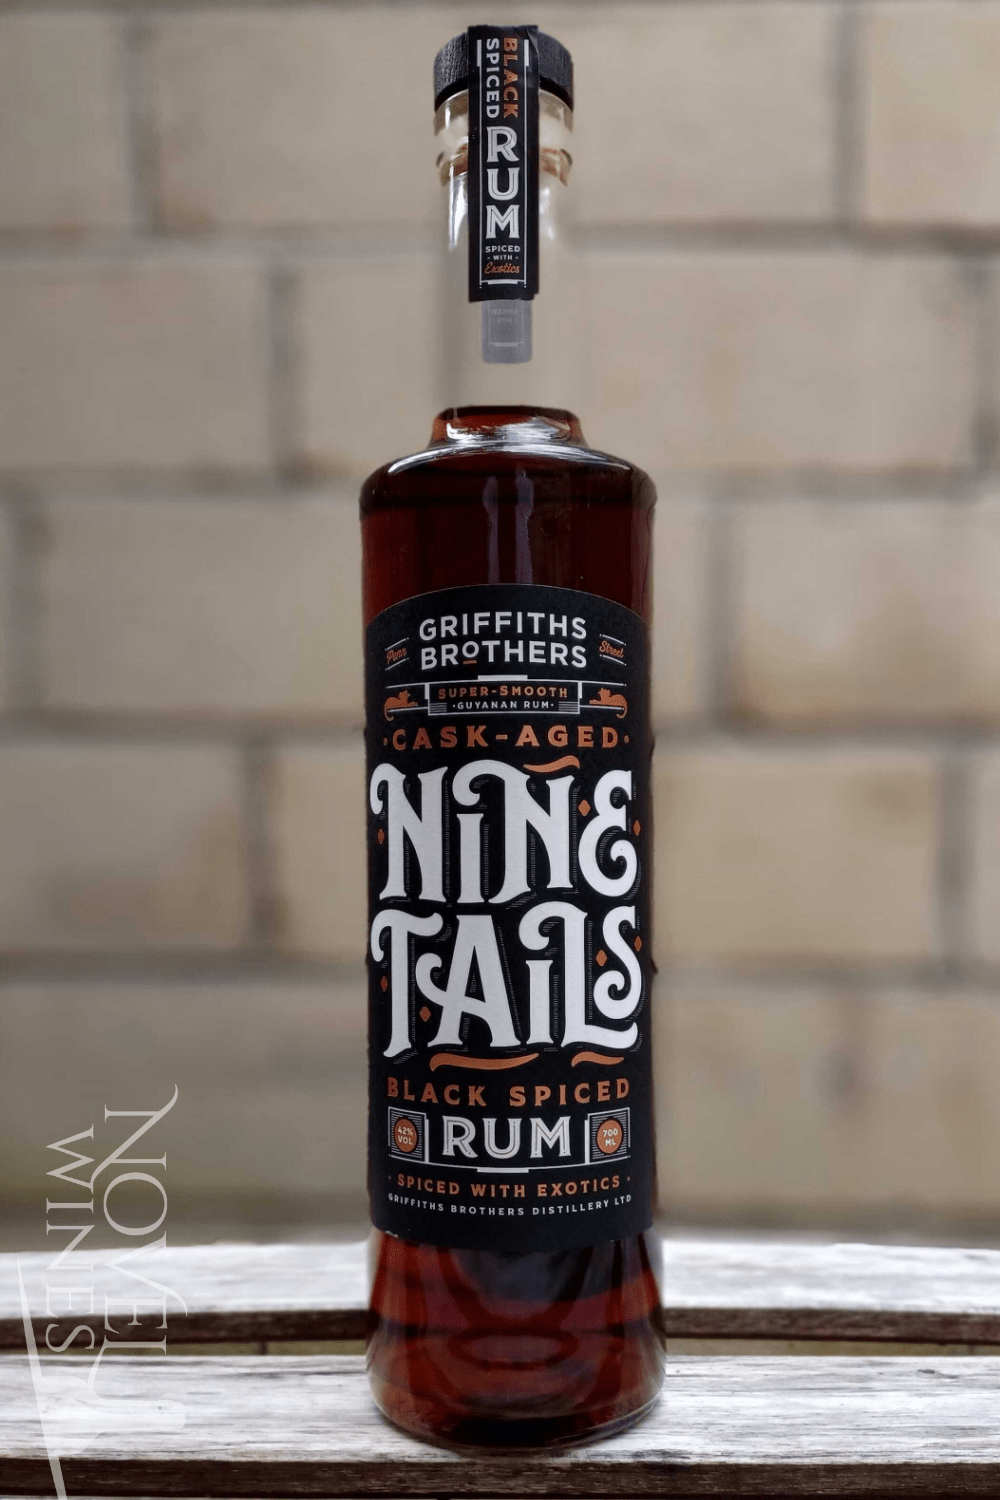 Burning Barn Rum Griffiths Brothers Nine Tails Black Spiced Rum 42.0%, Guyana